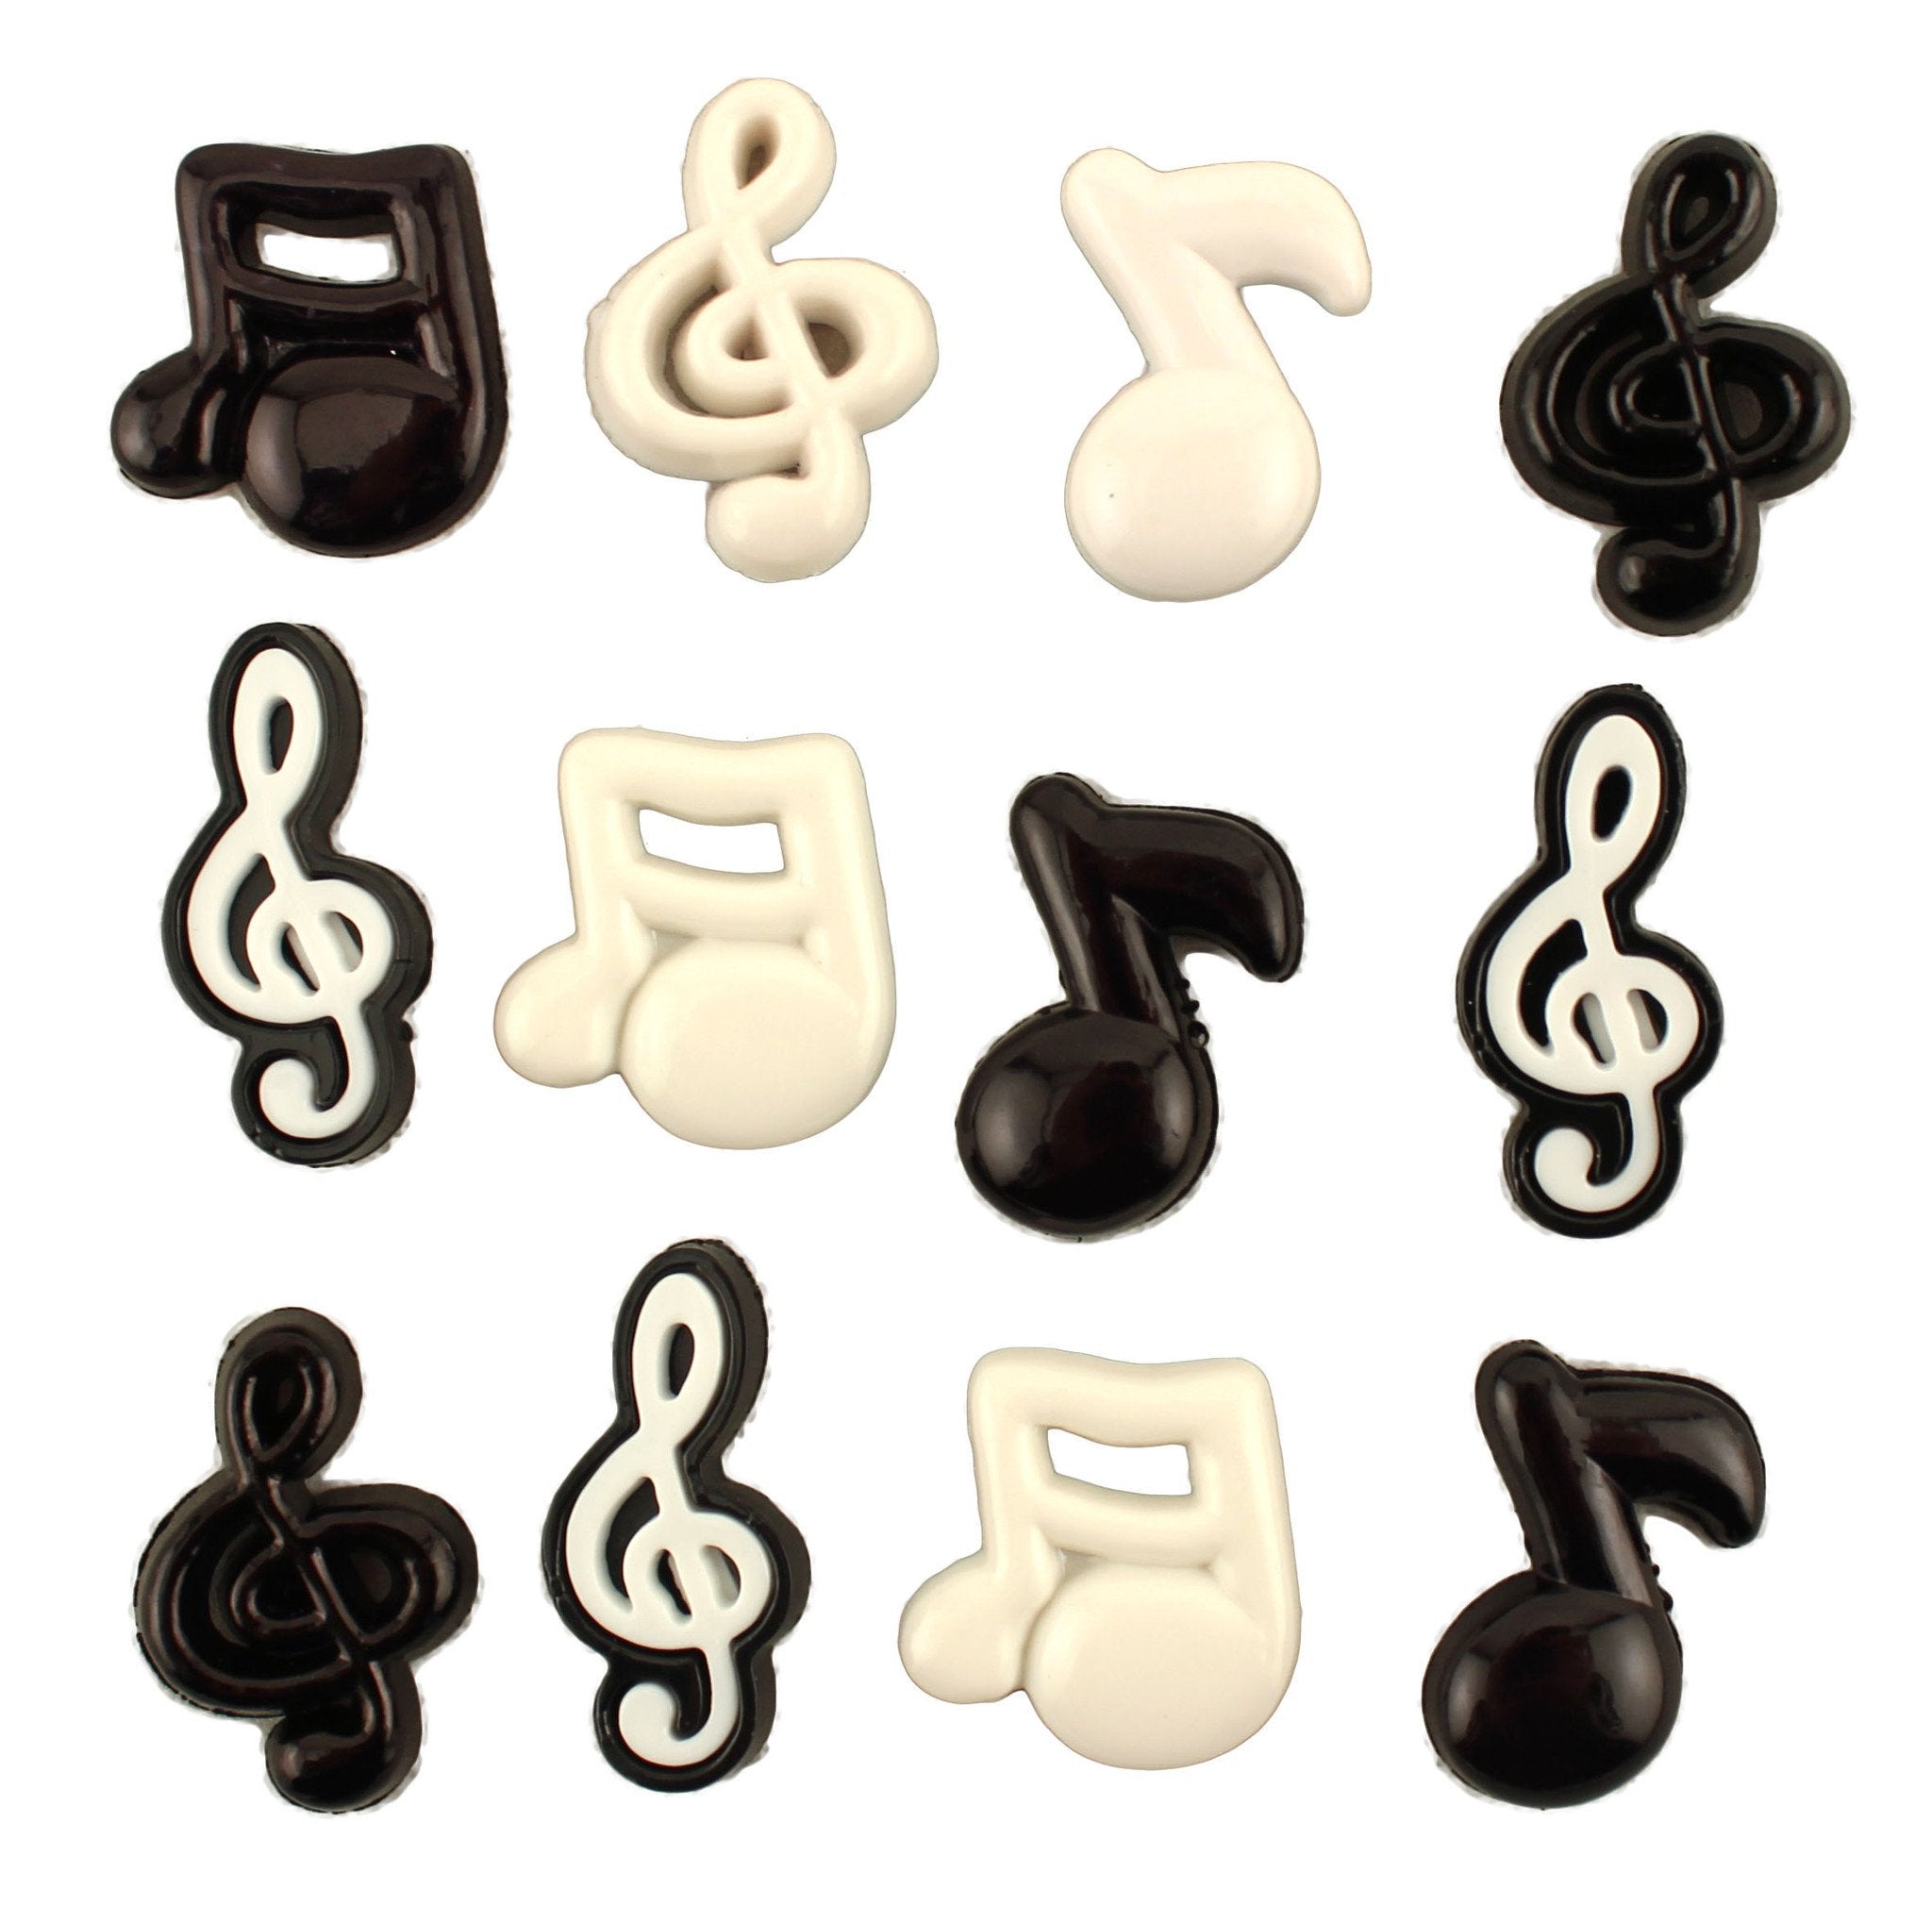 Music Notes-4279 - Buttons Galore and More